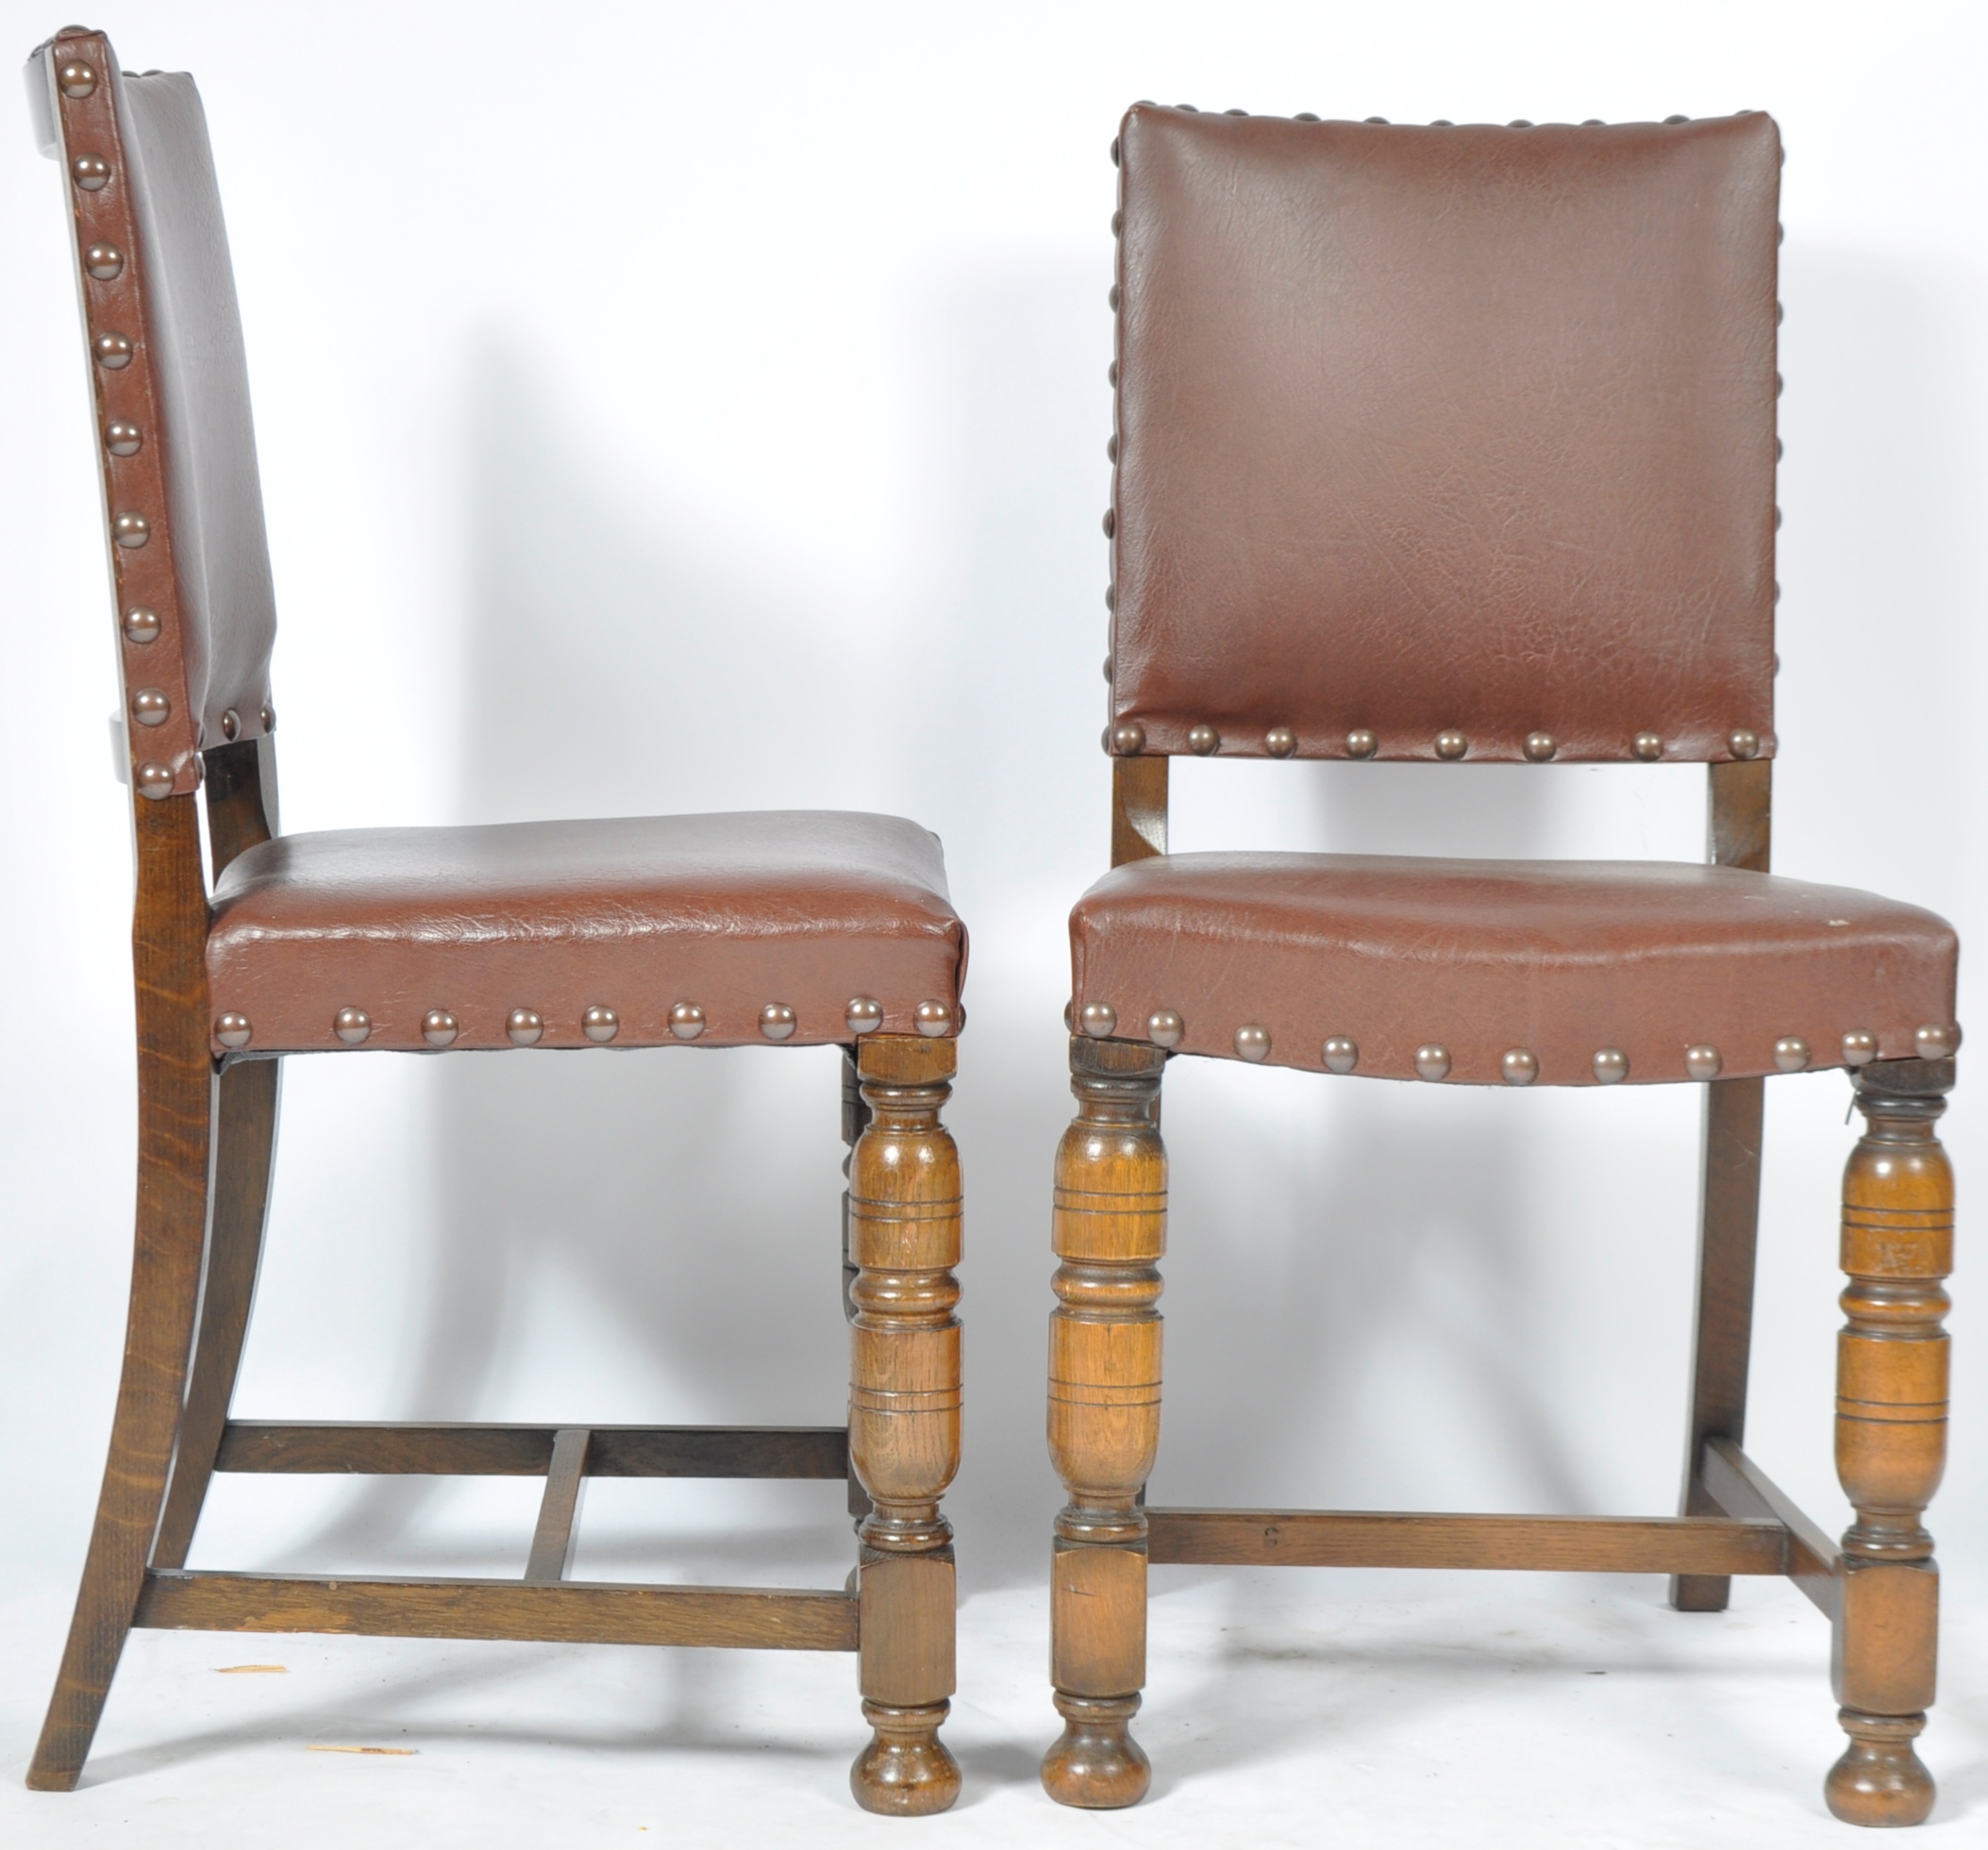 MATCHING SET OF TEN OAK AND LEATHERETTE DINING CHAIRS - Image 10 of 11